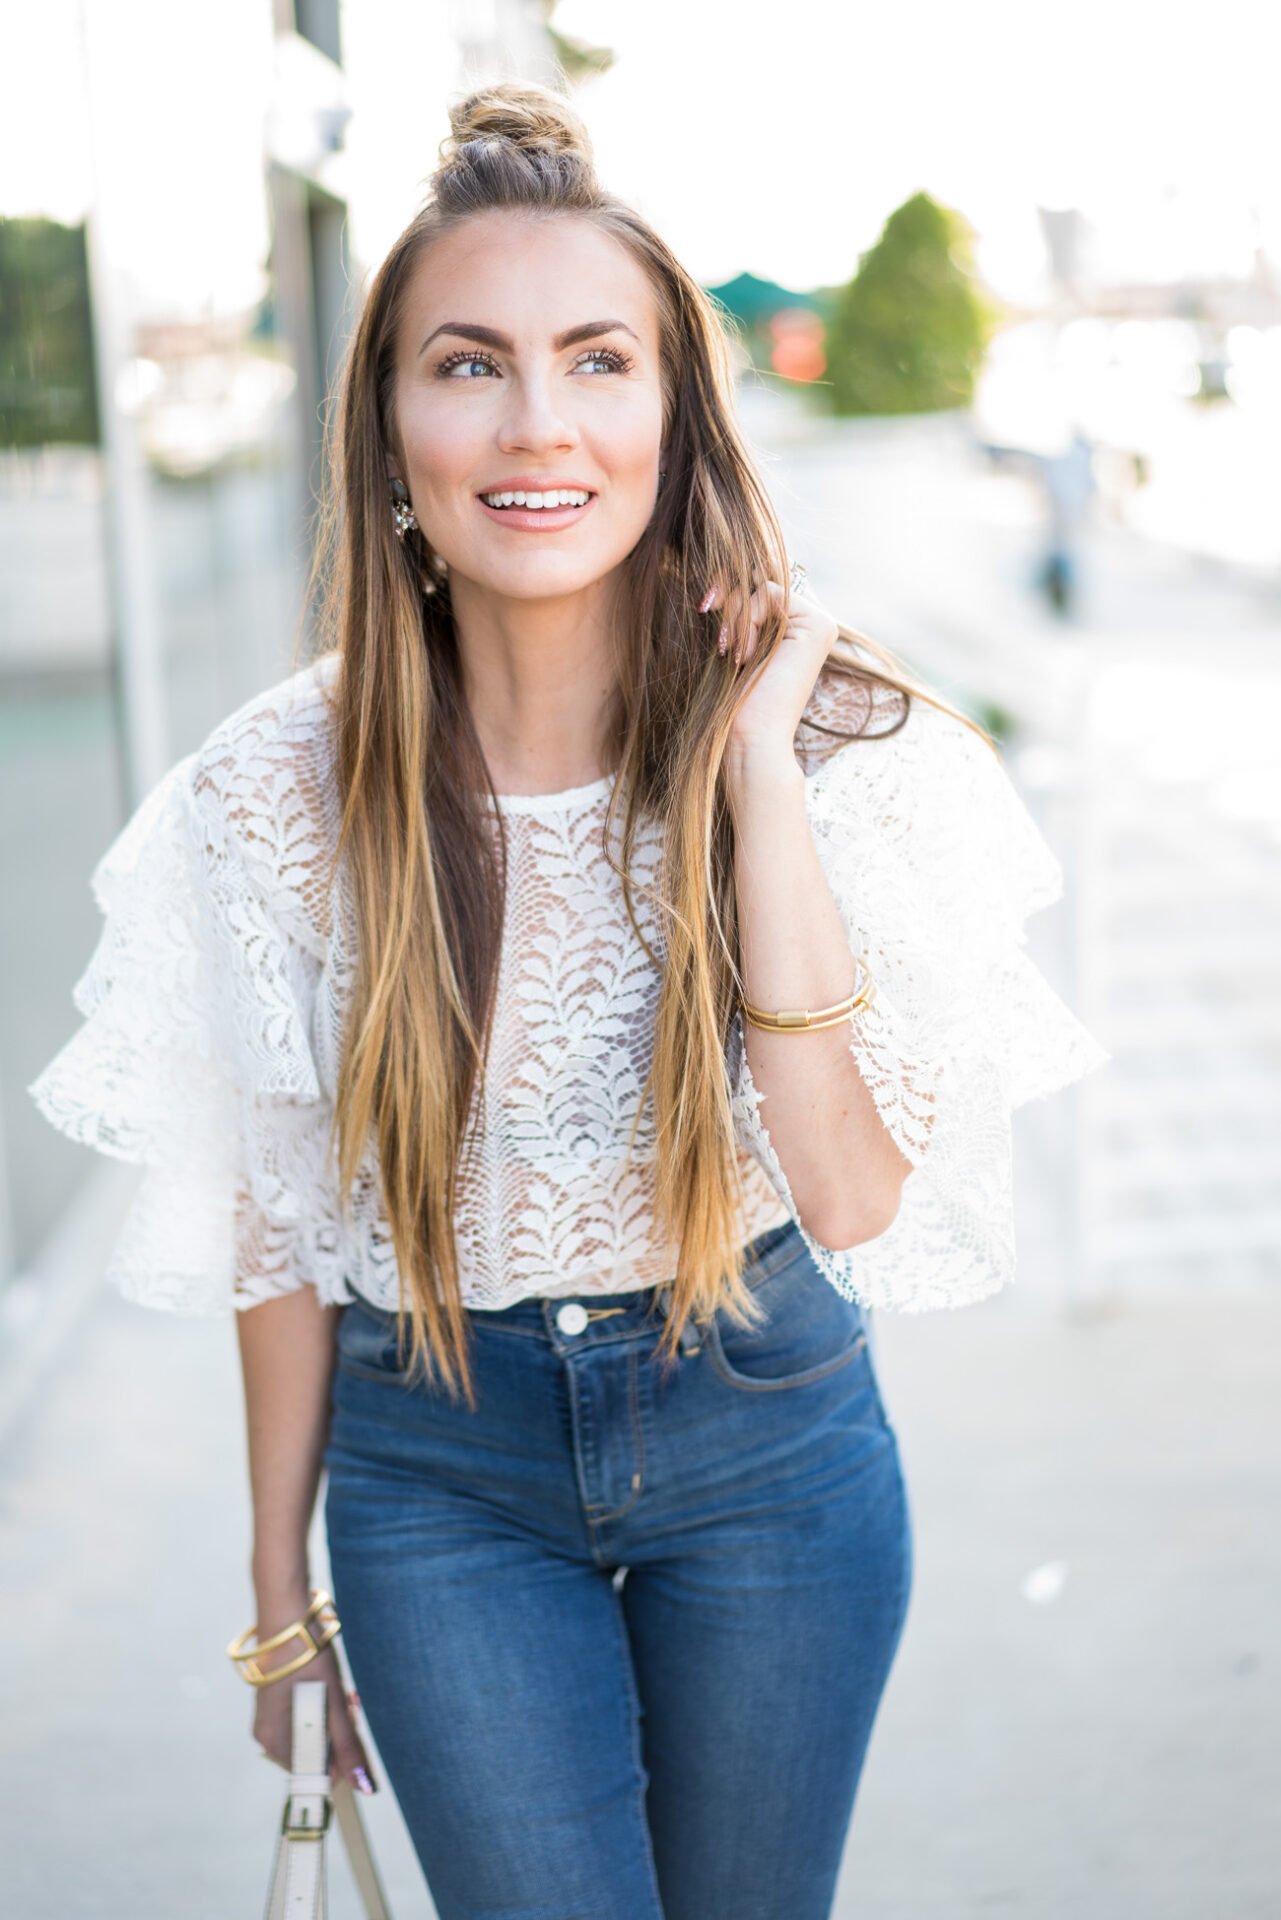 Sheer Tops and How to Style Them - Hello Gorgeous, by Angela Lanter